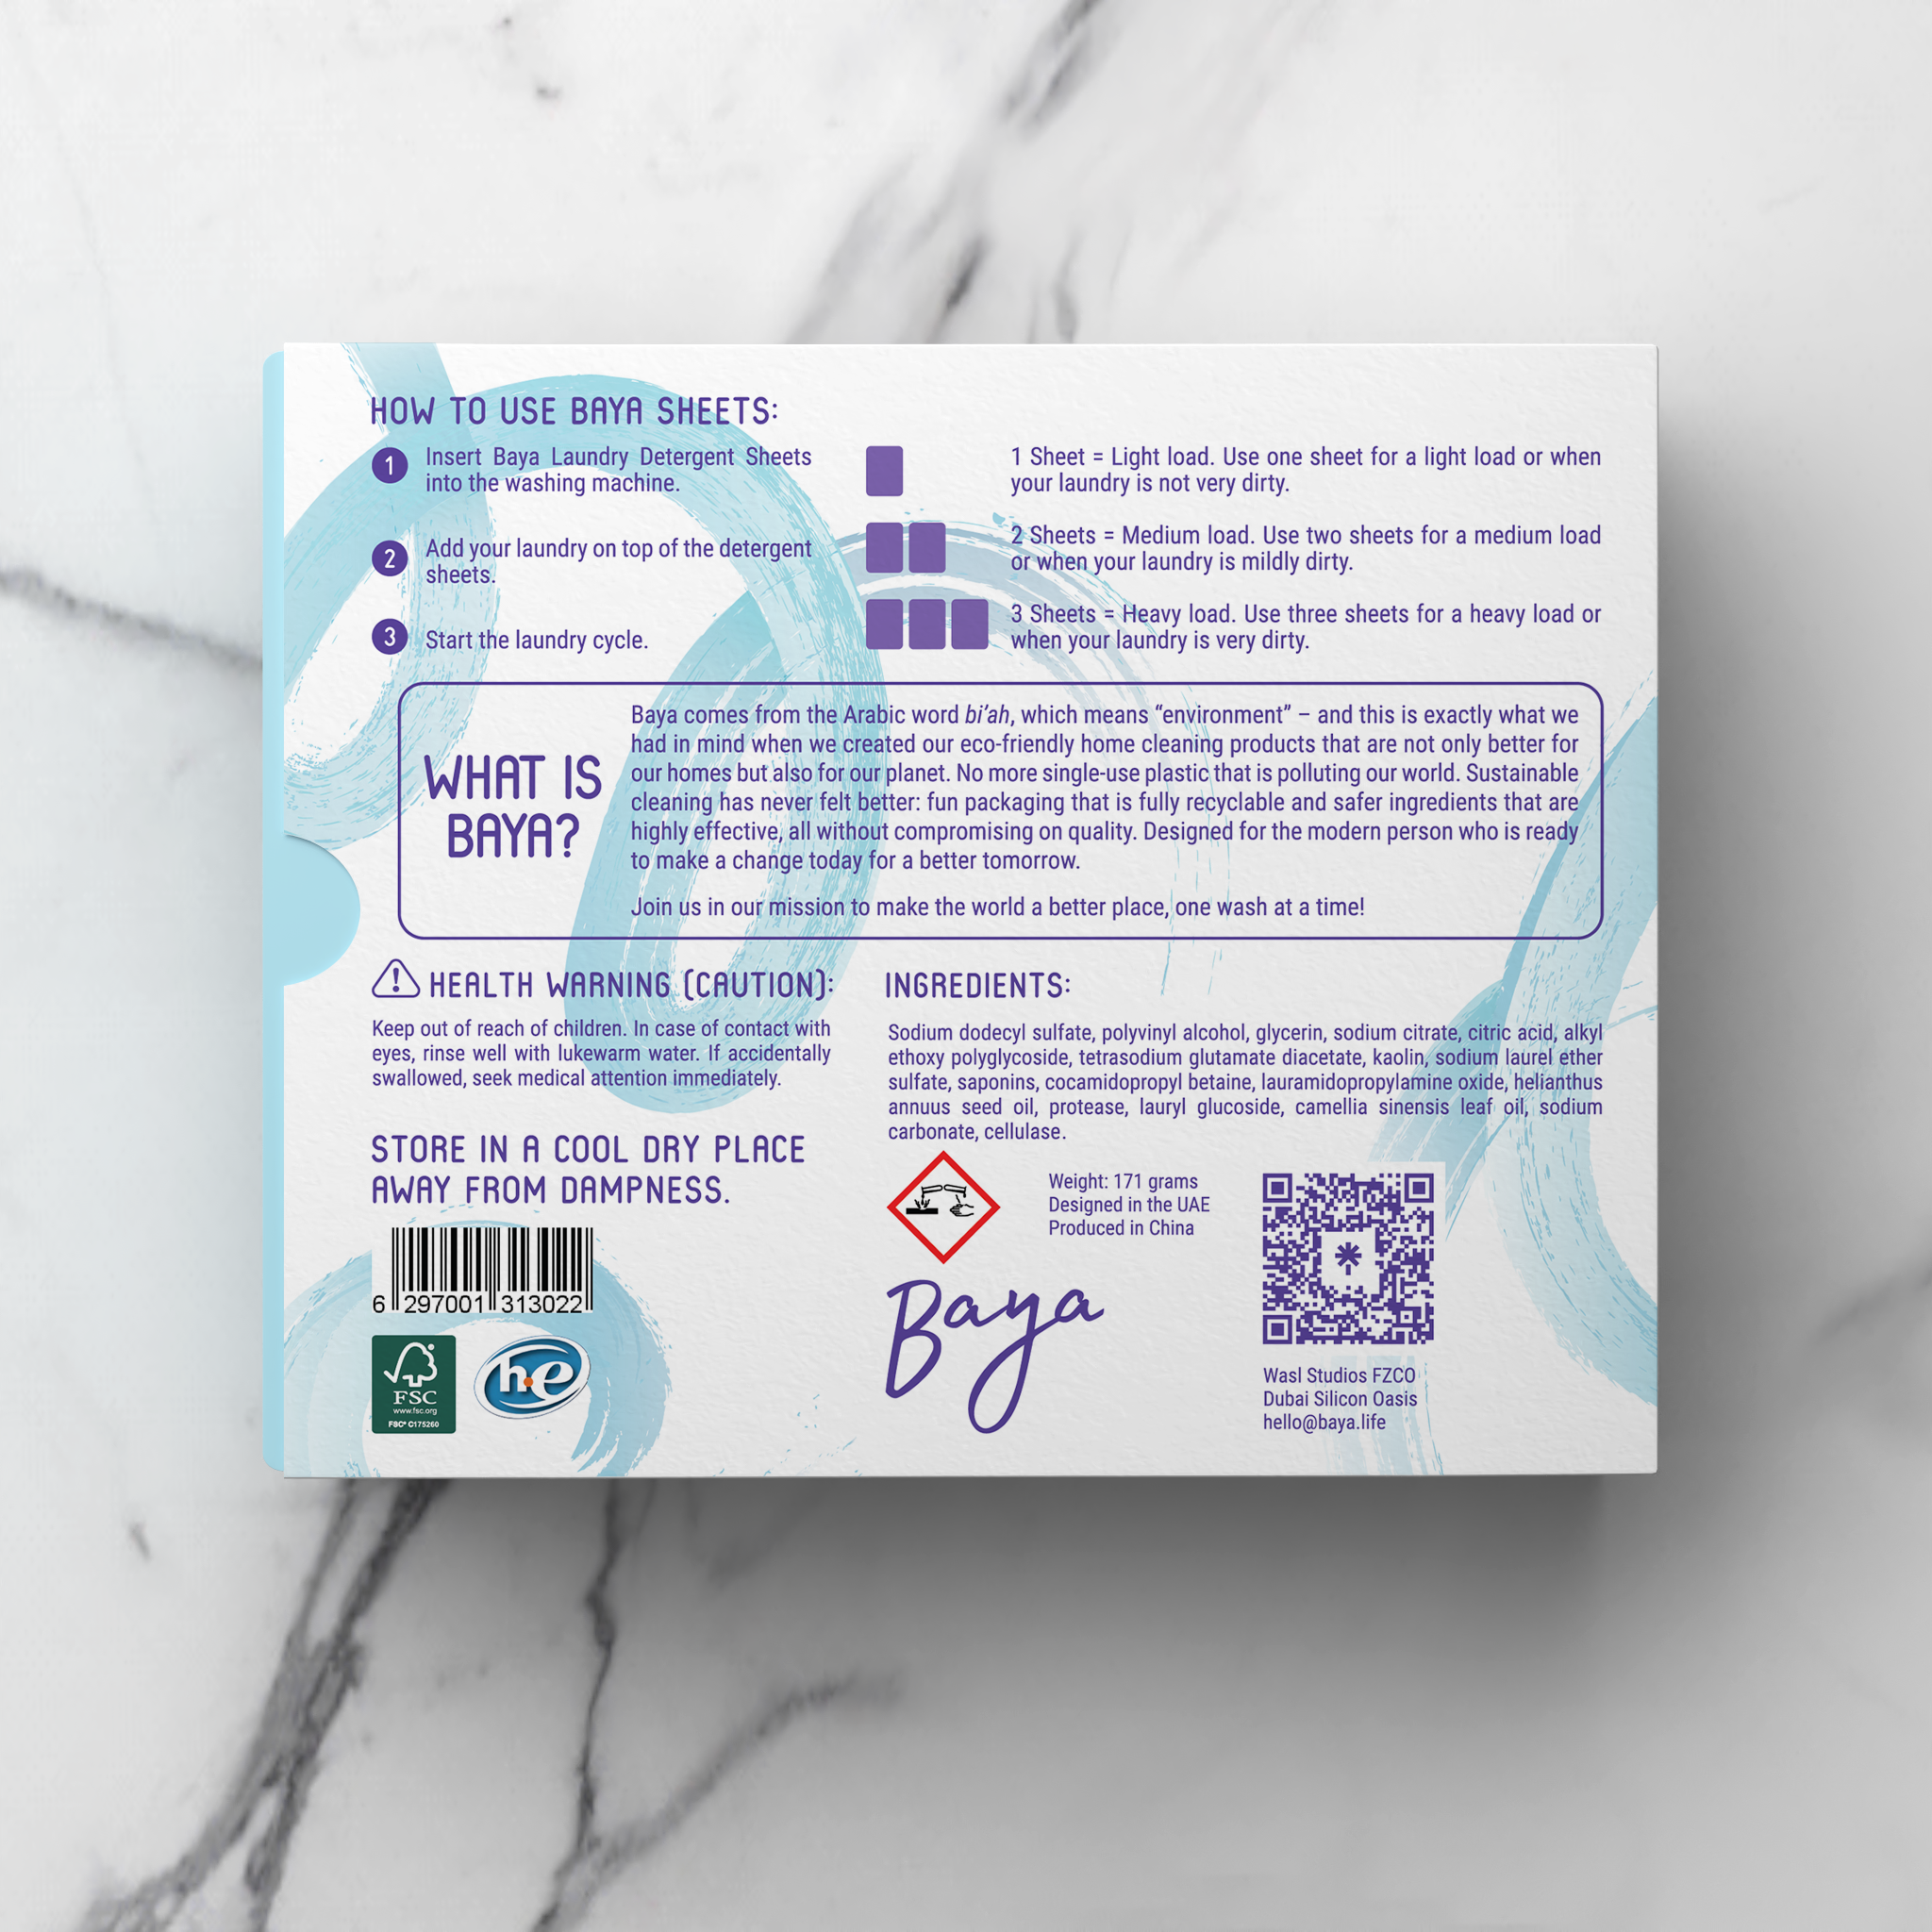 Laundry Detergent Sheets - Fragrance Free